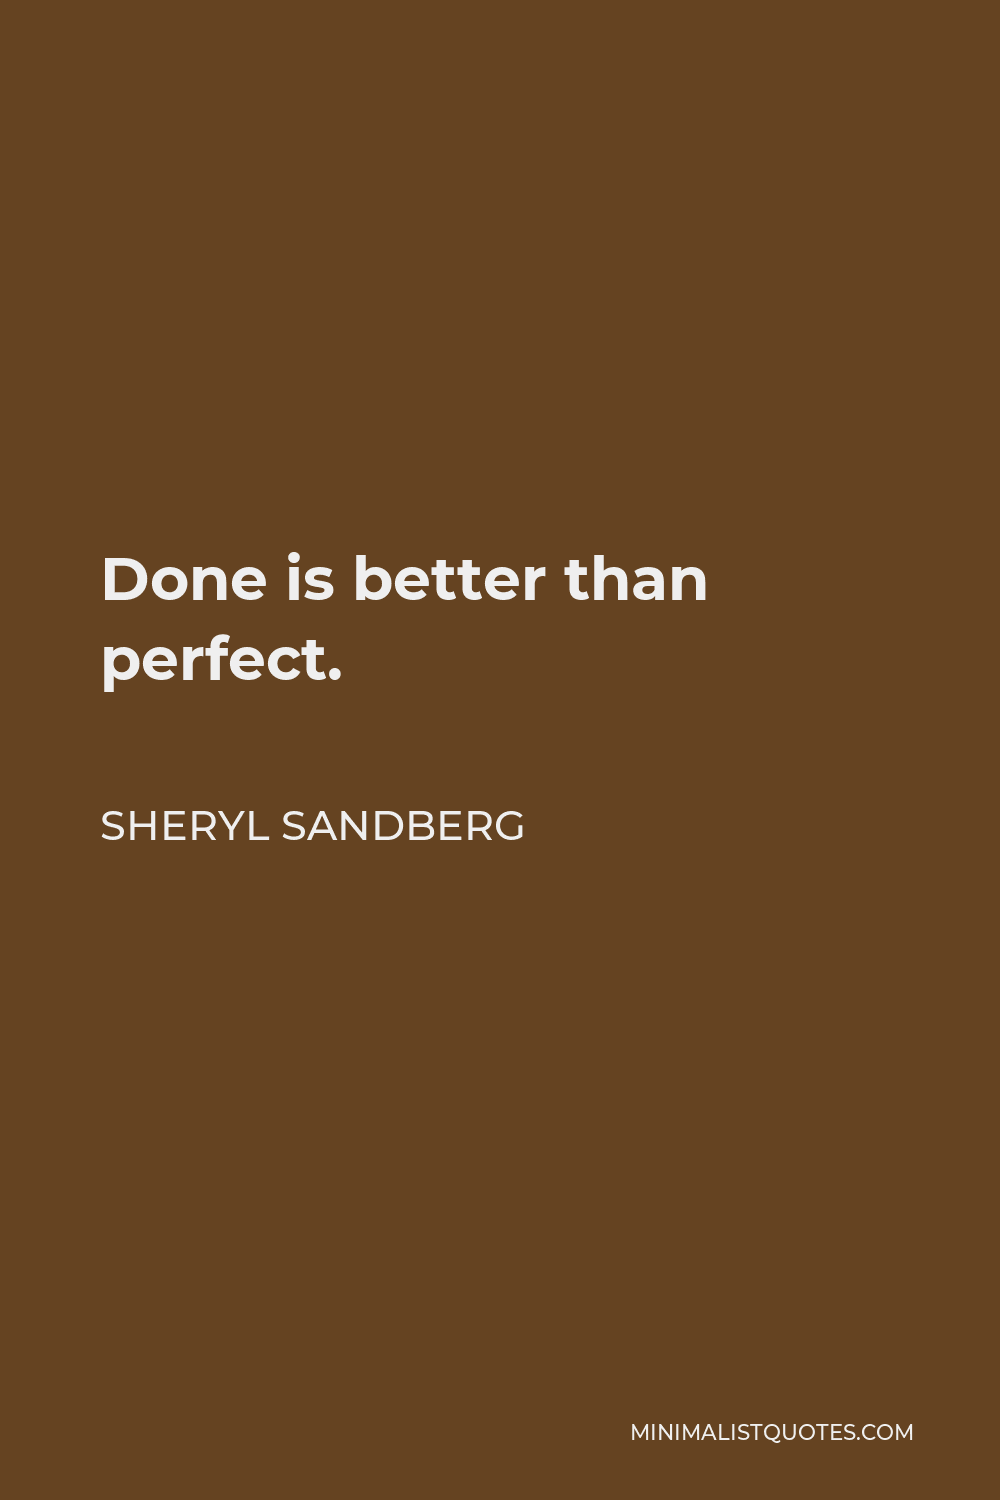 Sheryl Sandberg Quote - Done is better than perfect.